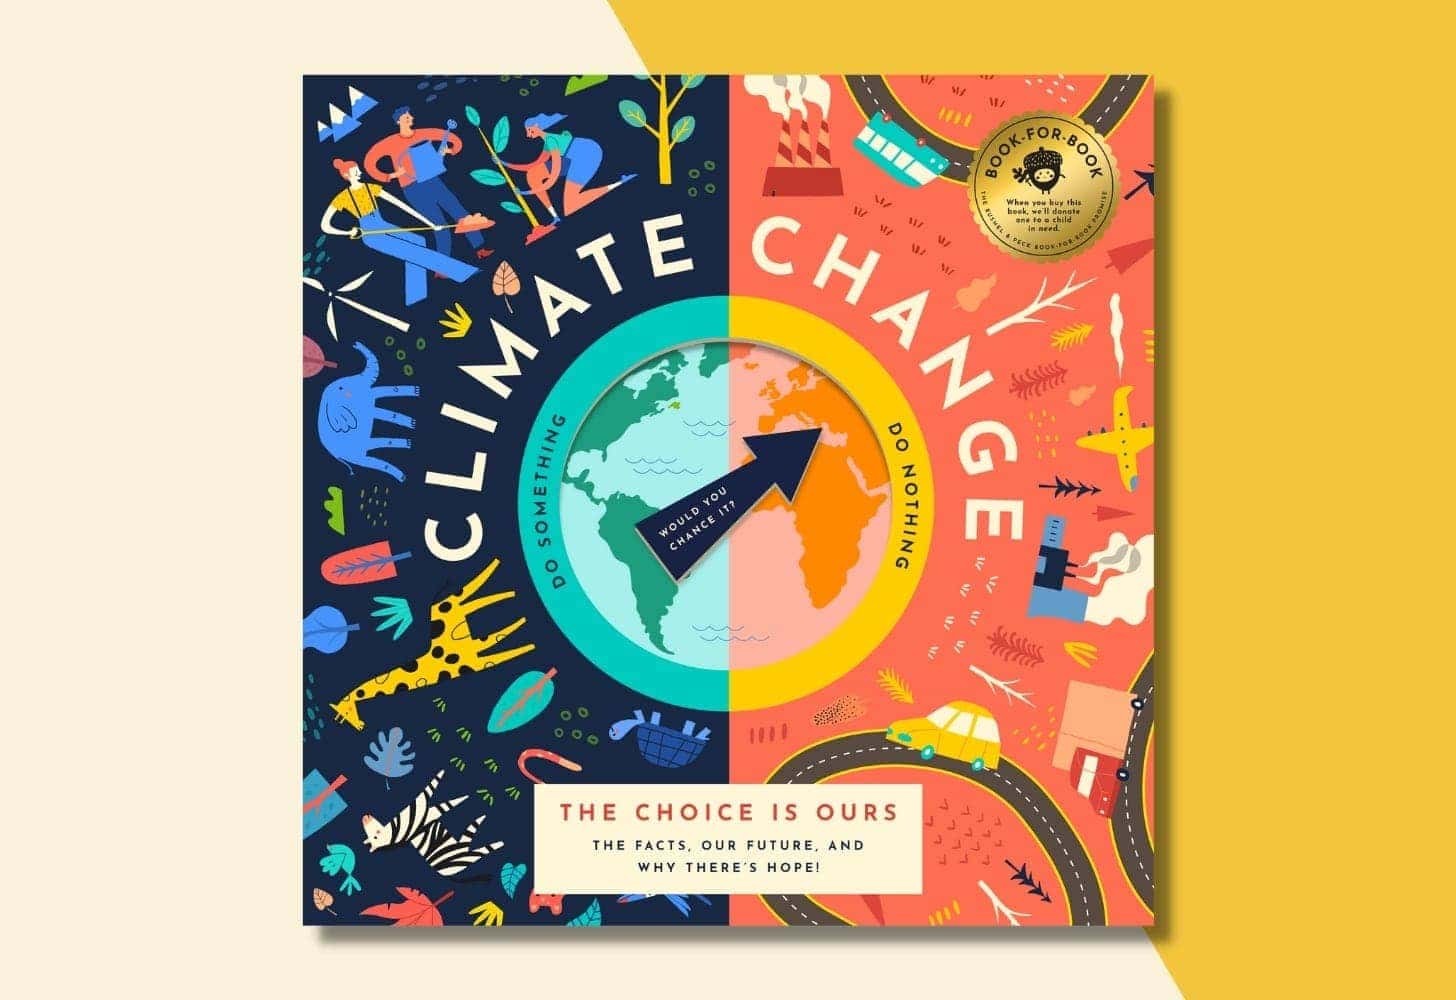 “Climate Change, the Choice Is Ours: The Facts, Our Future, and Why There’s Hope!” David Miles, illustrated by Albert Pinilla